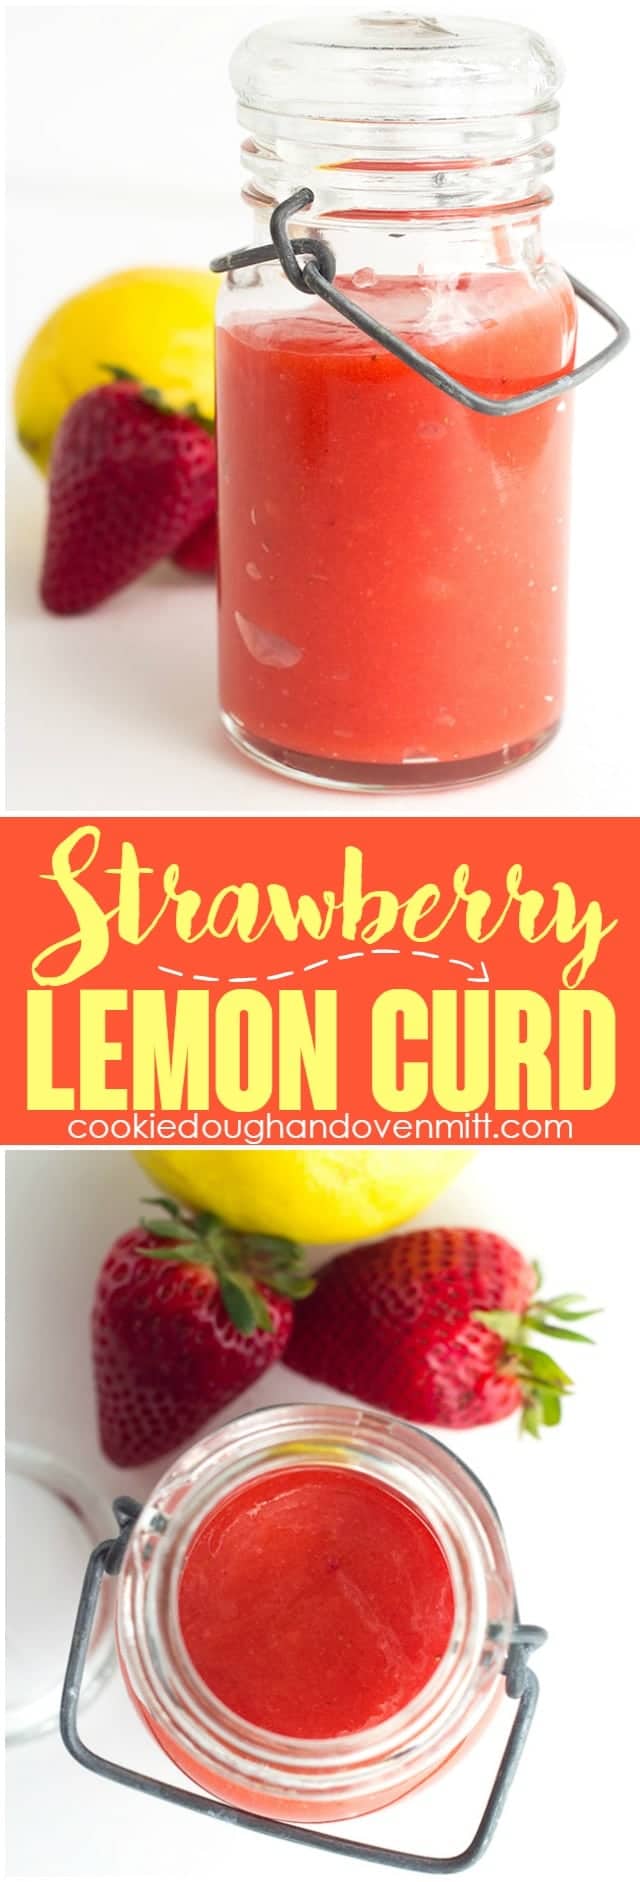 Strawberry Lemon Curd - fresh pureed strawberries and lemon juice make the perfect filling. It's sweet and is a delicious spring flavor to put in your cookies, cakes, and cupcakes!